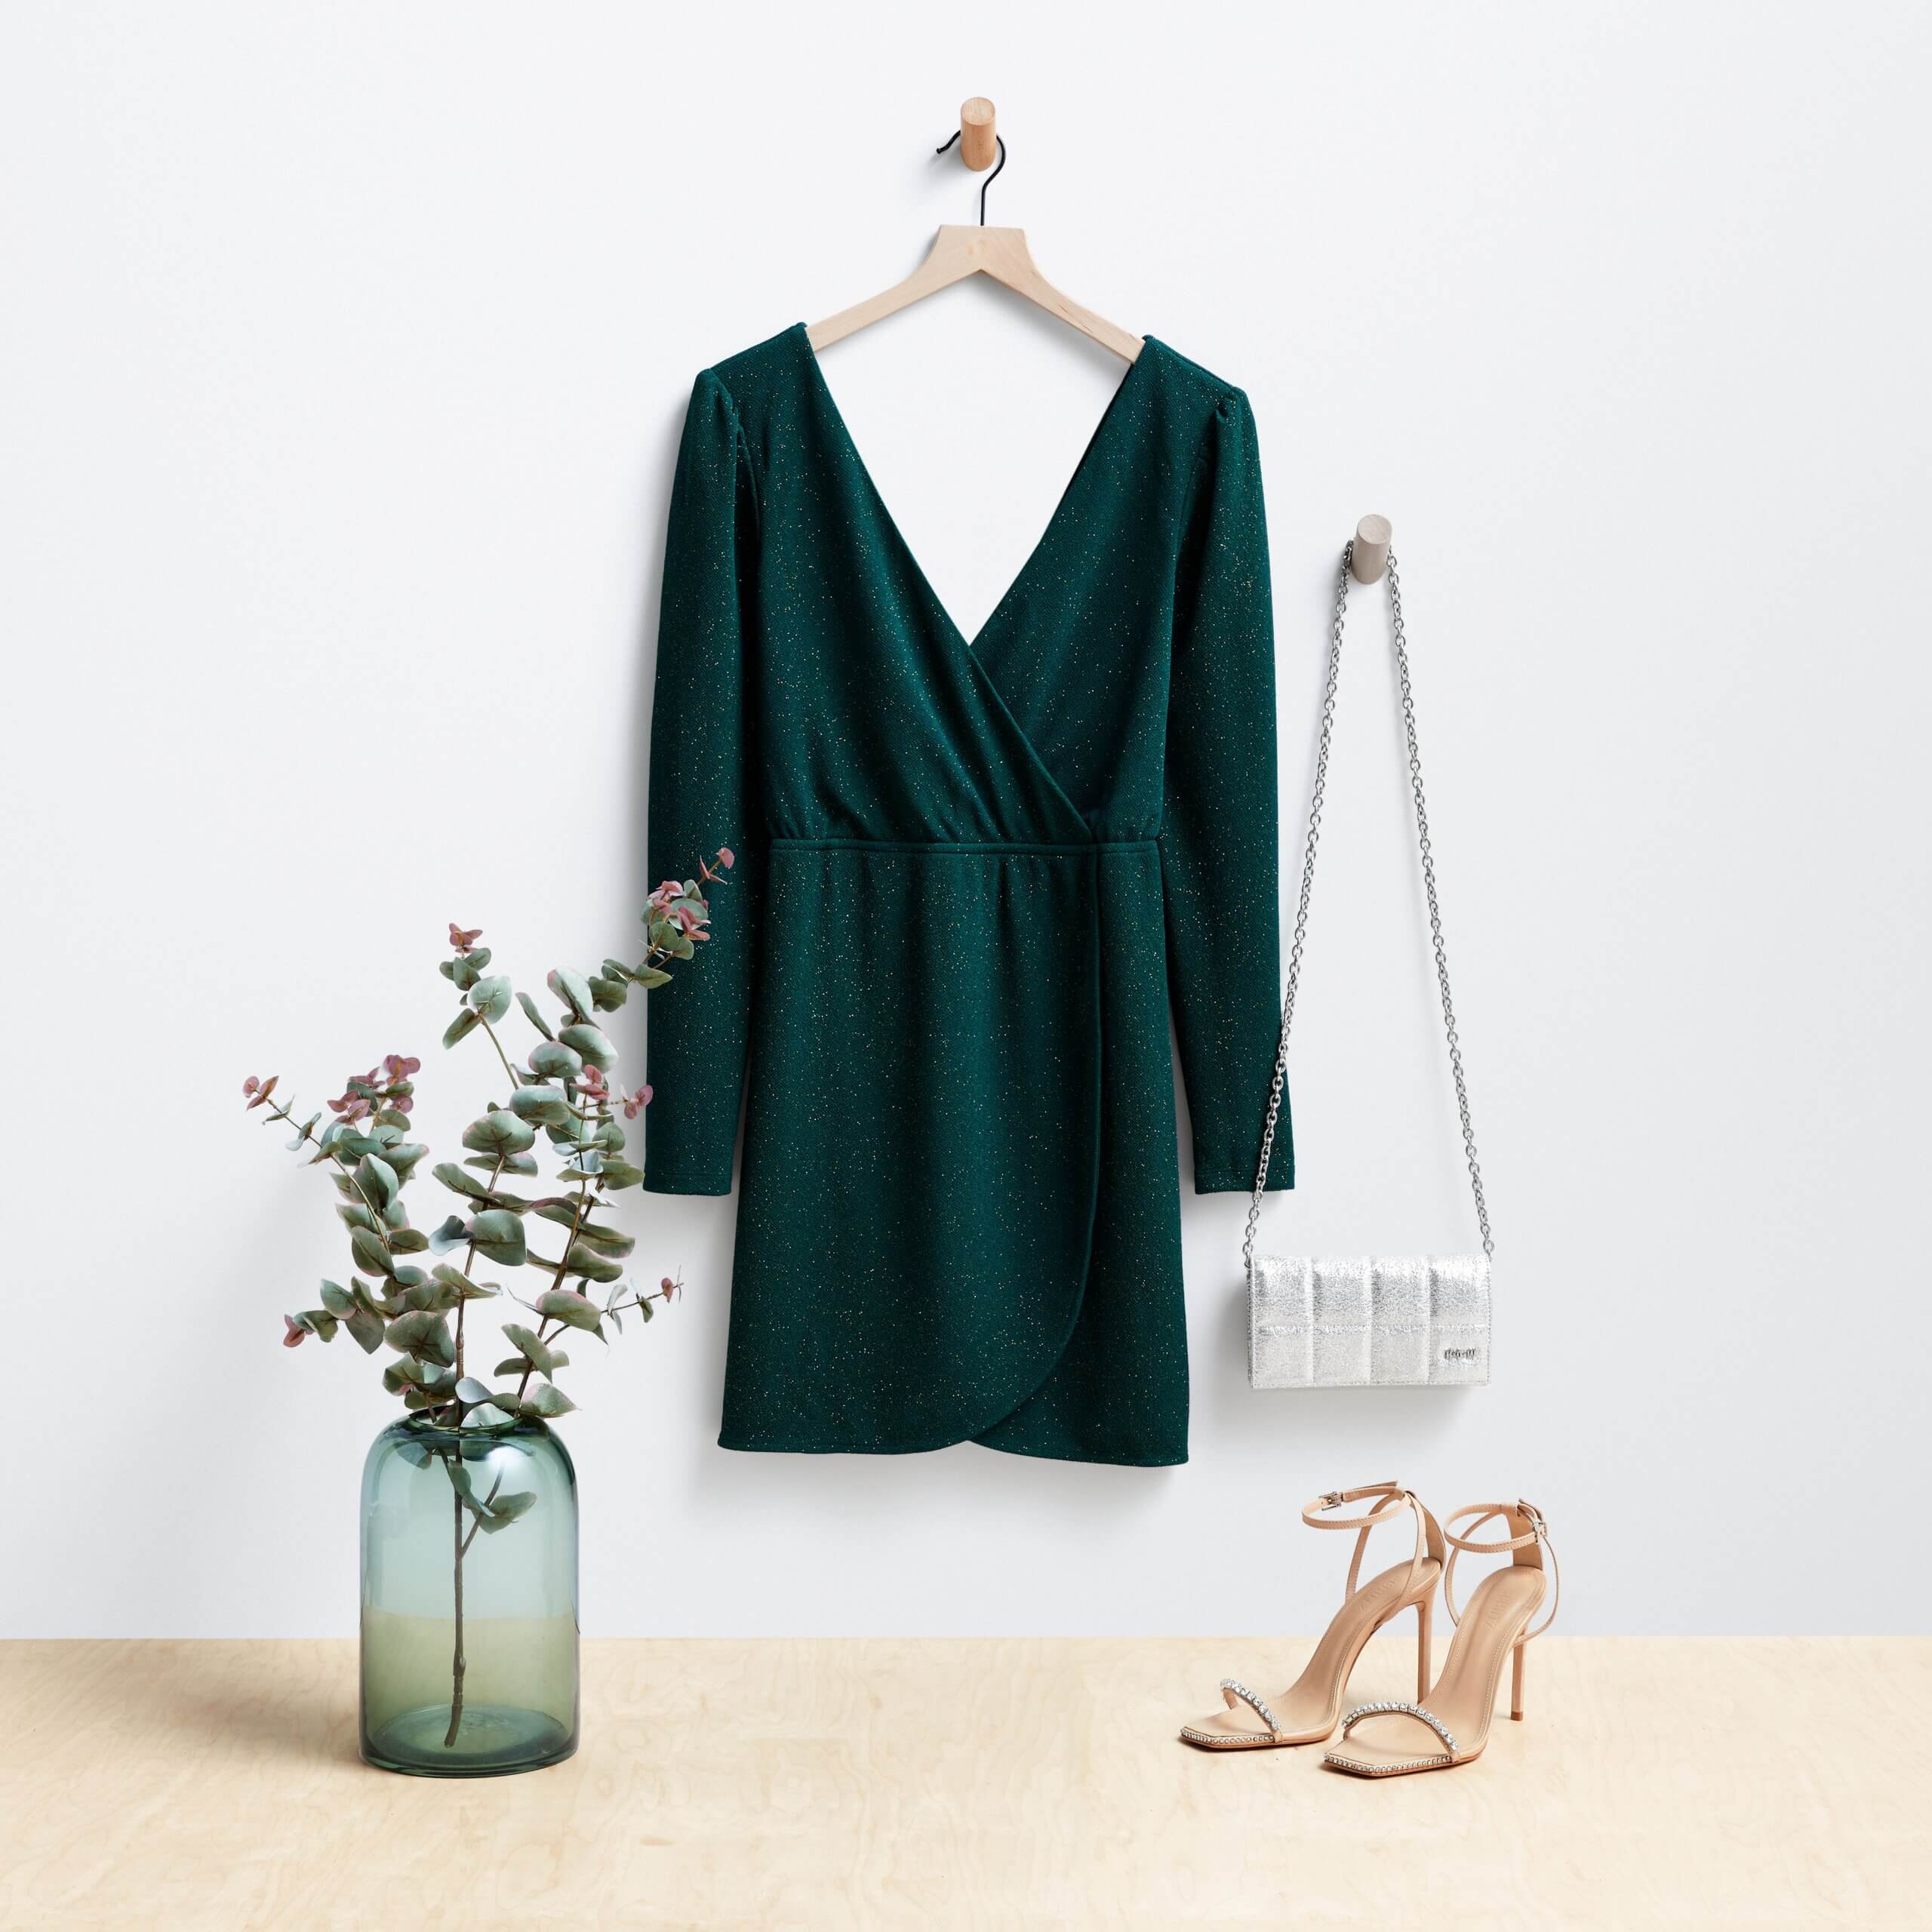 Stitch Fix women's outfit featuring emerald green dress and white clutch hanging on wooden pegs next to nude strappy heels.